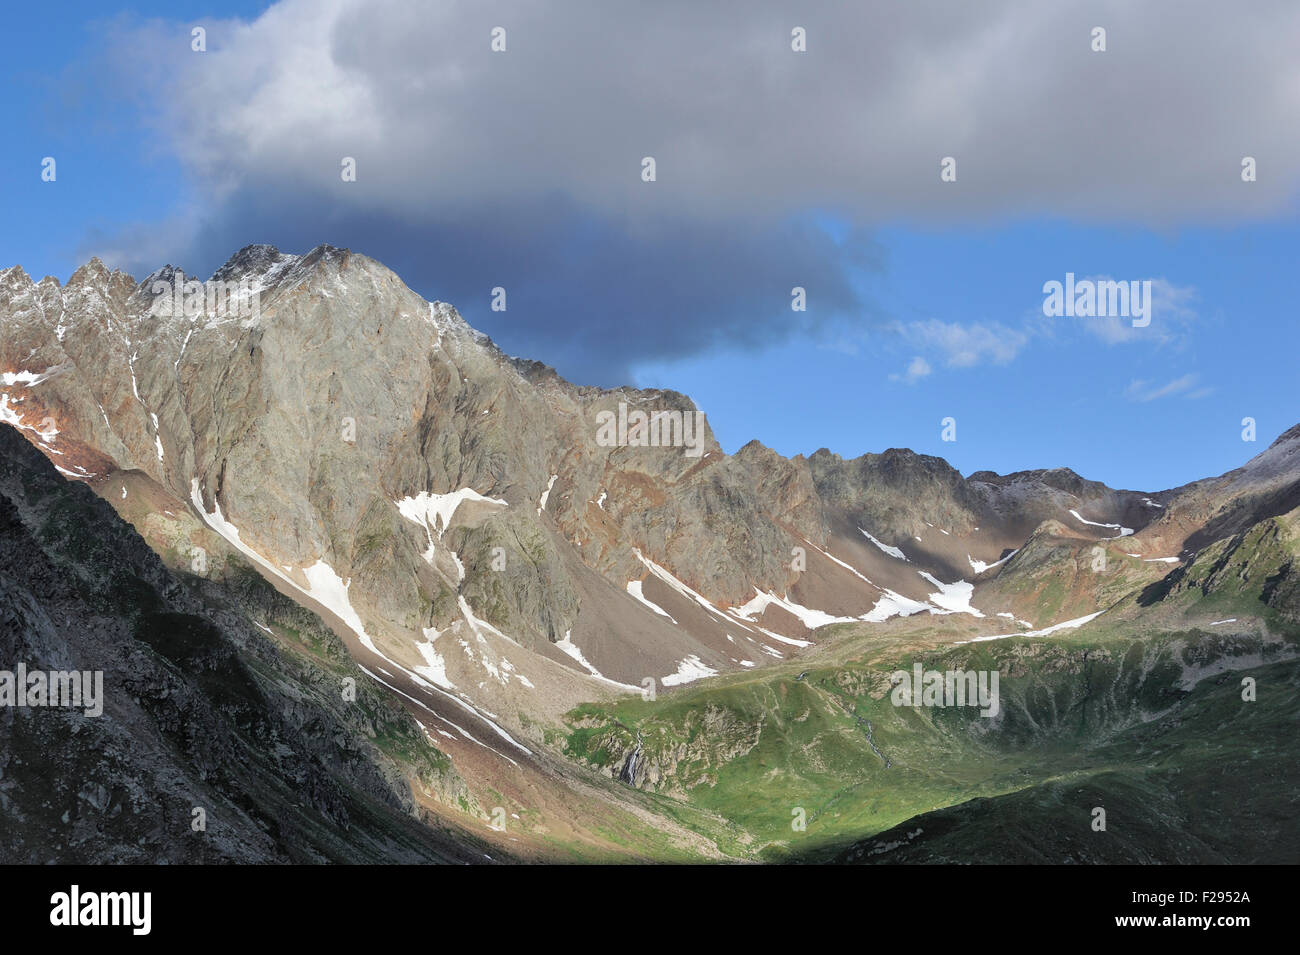 View over mountain summits along the mountain pass Passo di Gavia in the Italian Alps, Lombardy, Italy Stock Photo